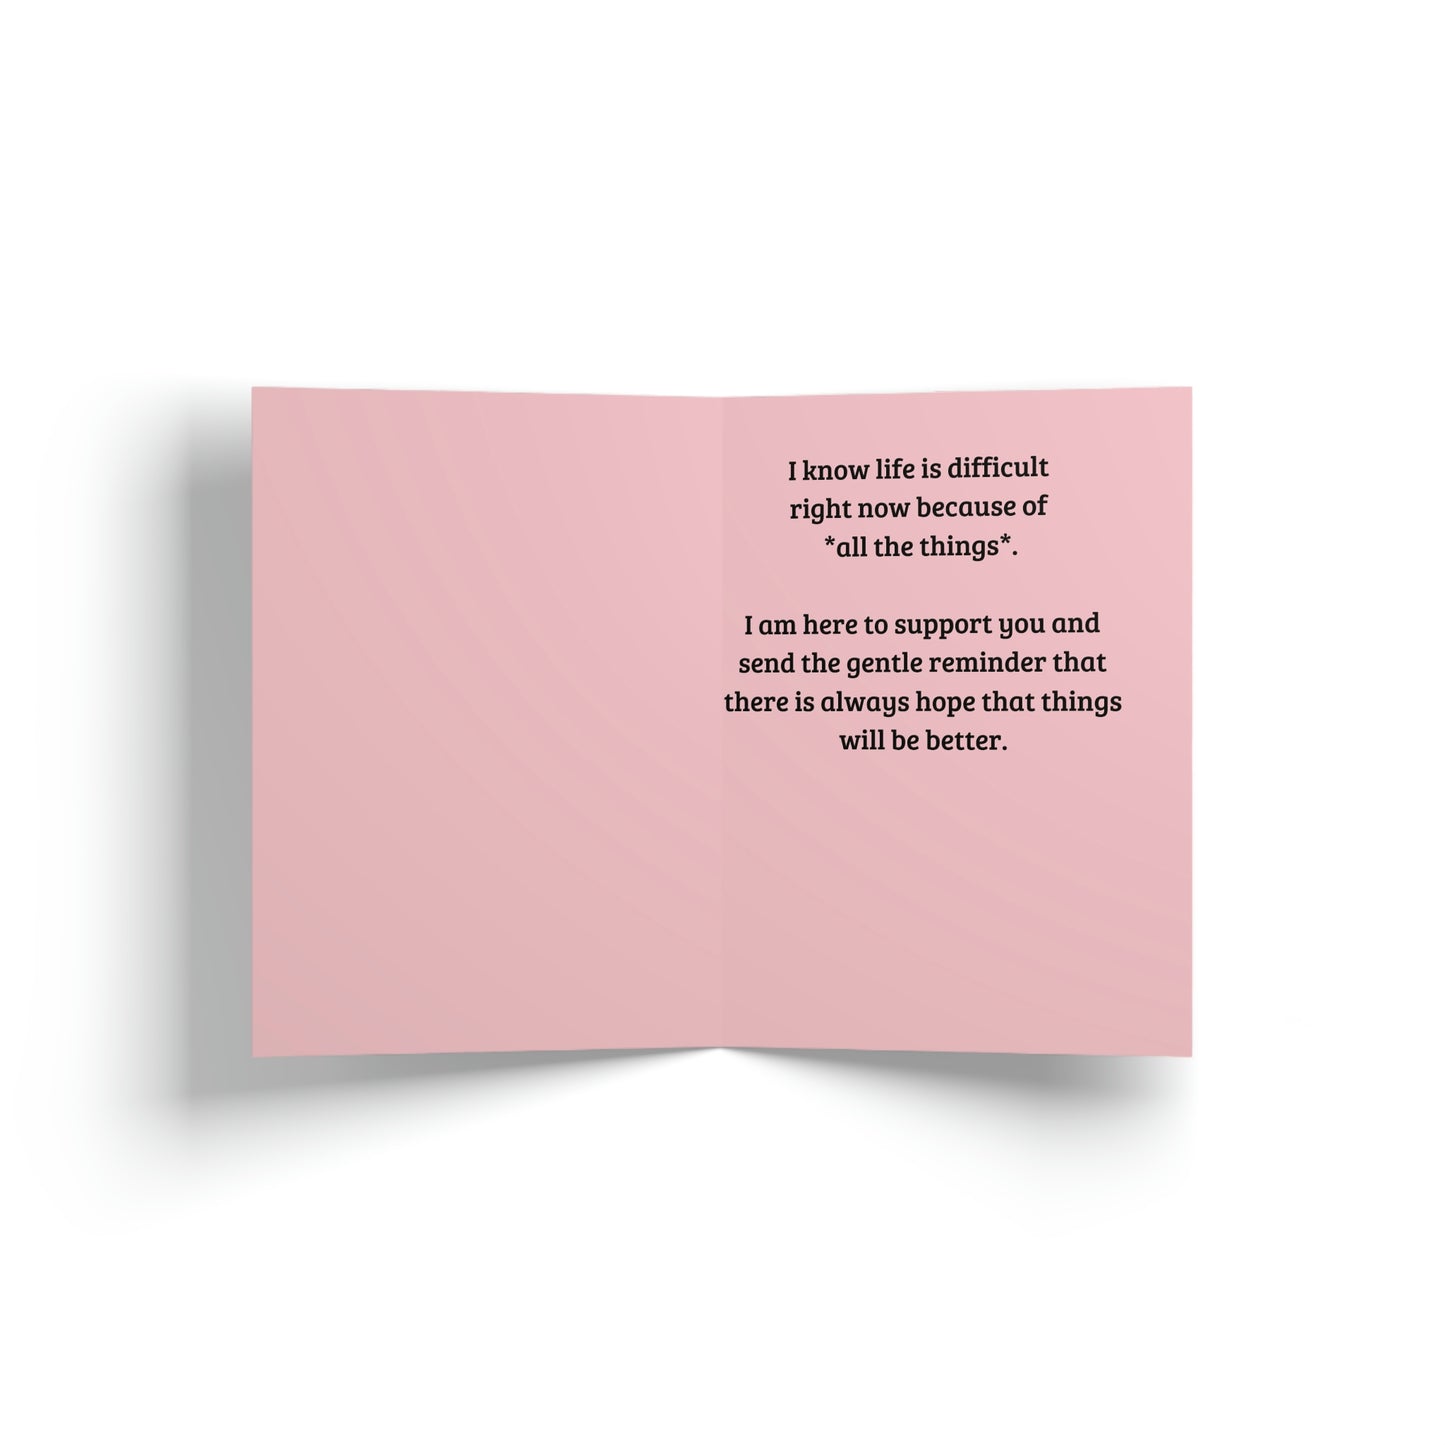 Dis Tew Much -  Show Your Support  - Uncommon Greeting Cards for Common Occasions